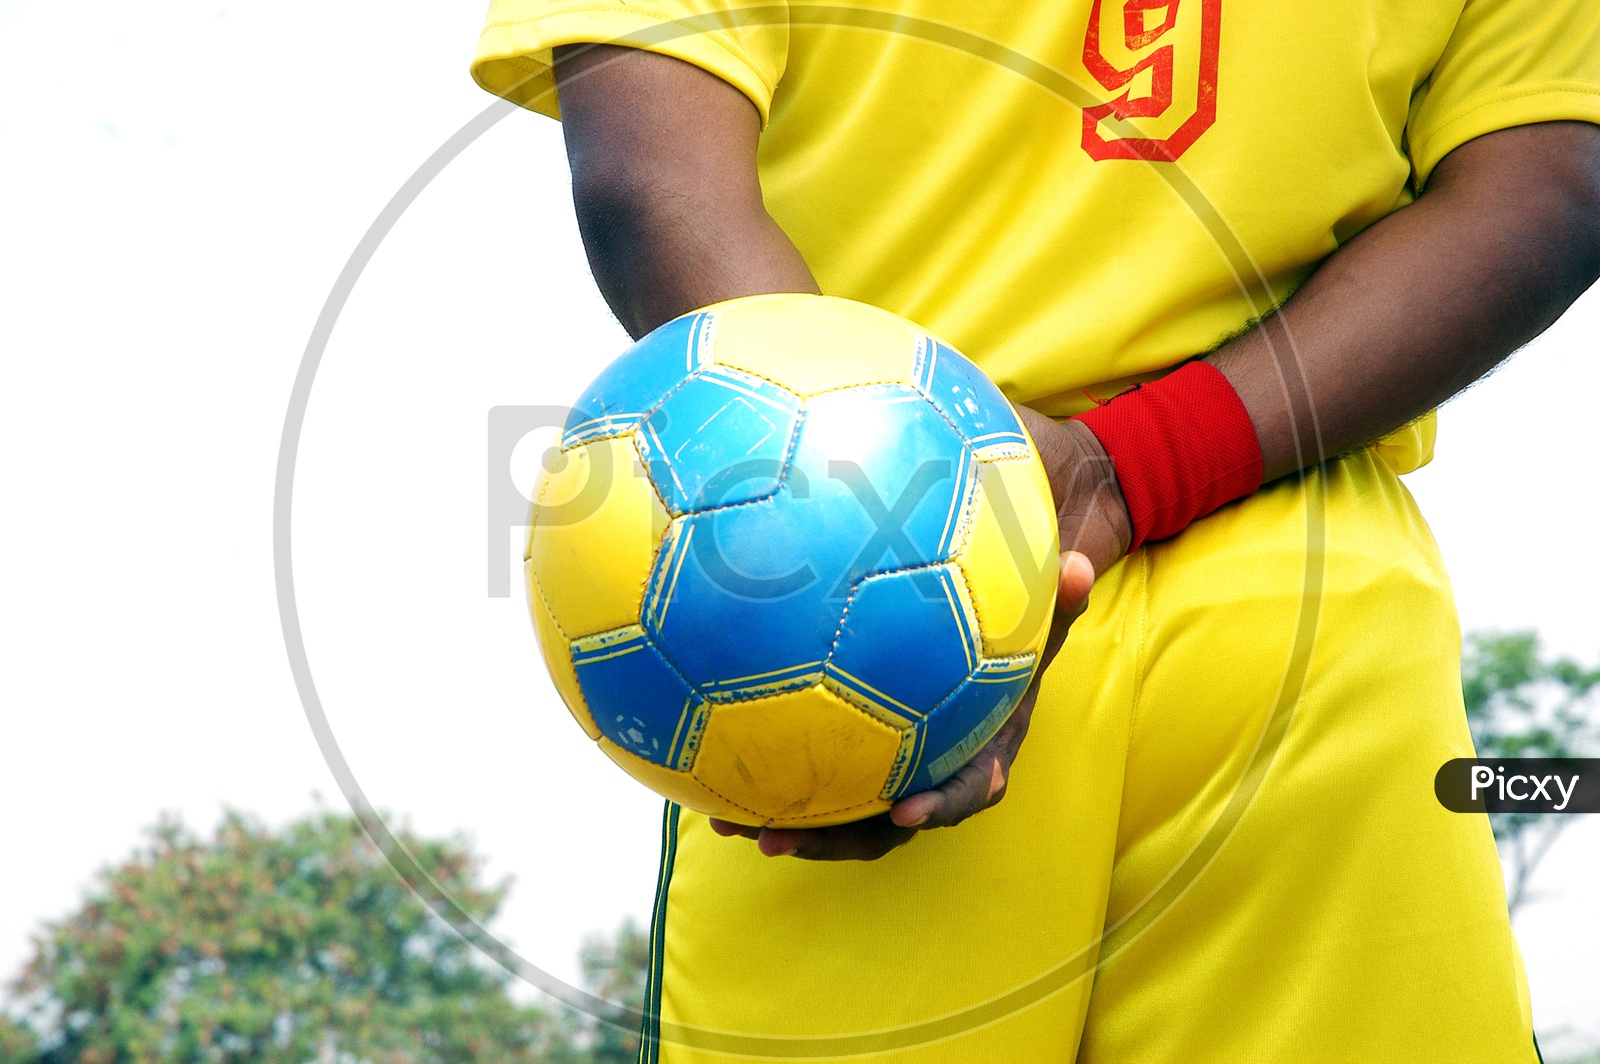 Player holding the football